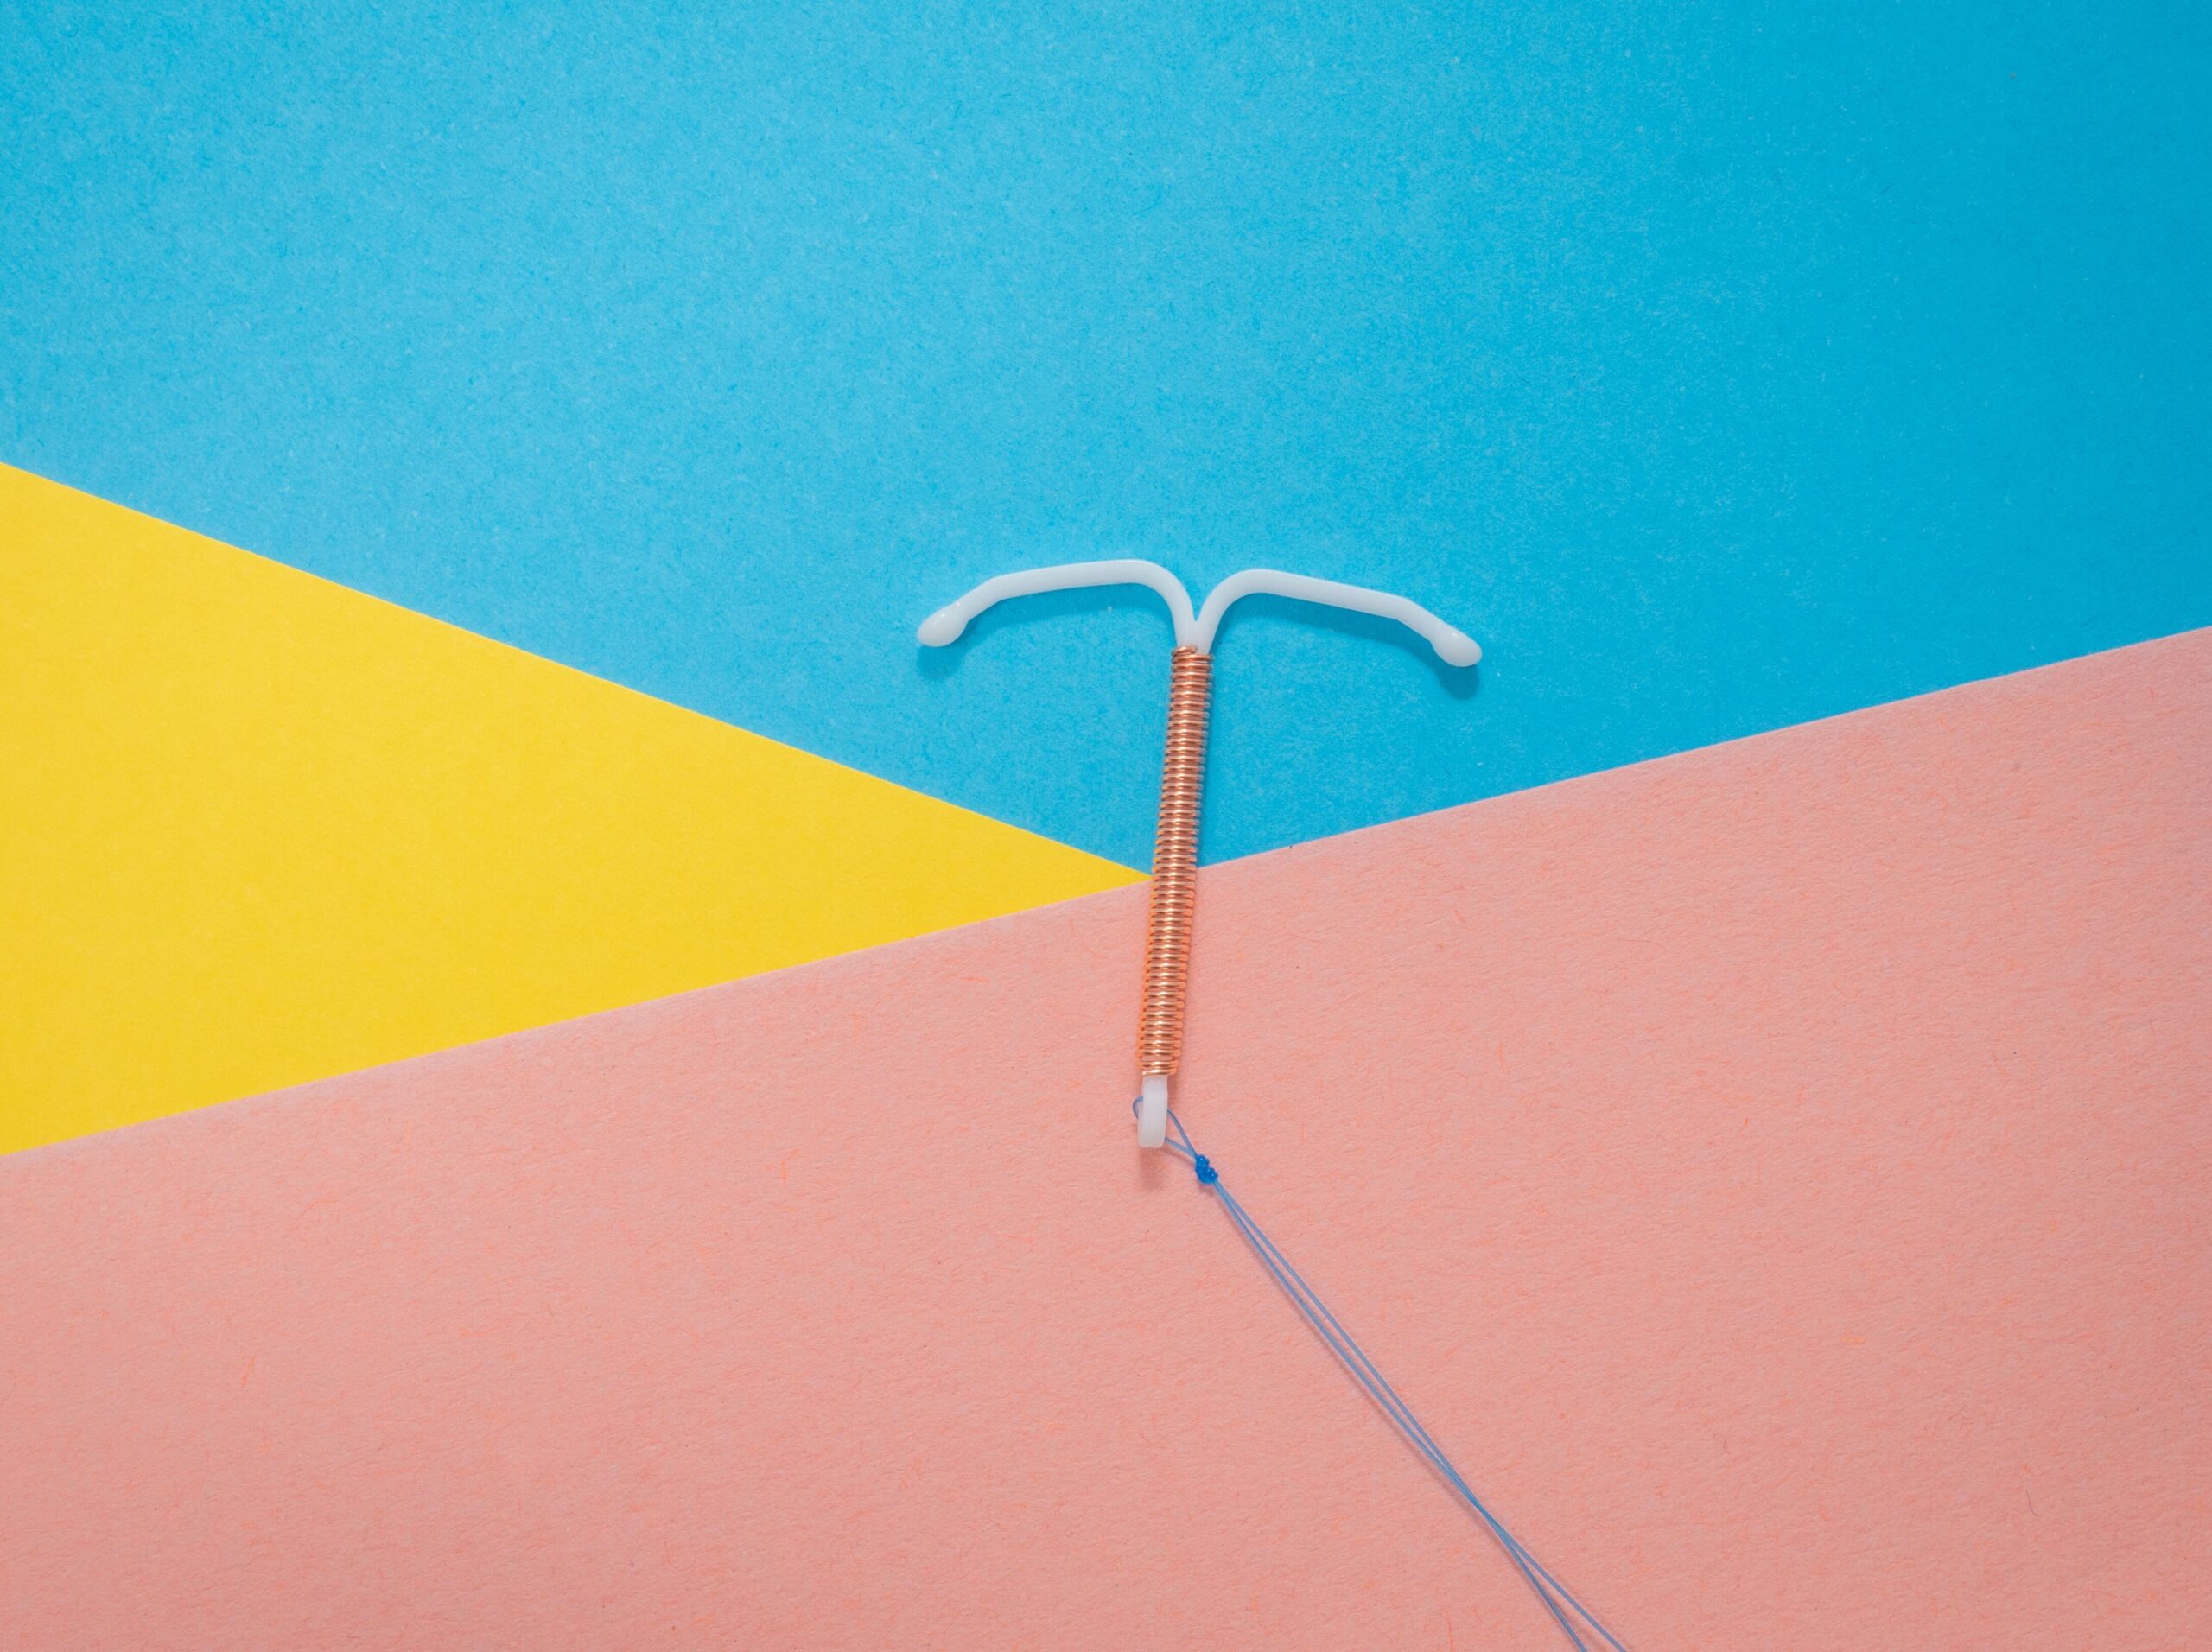 Image of an intrauterine device